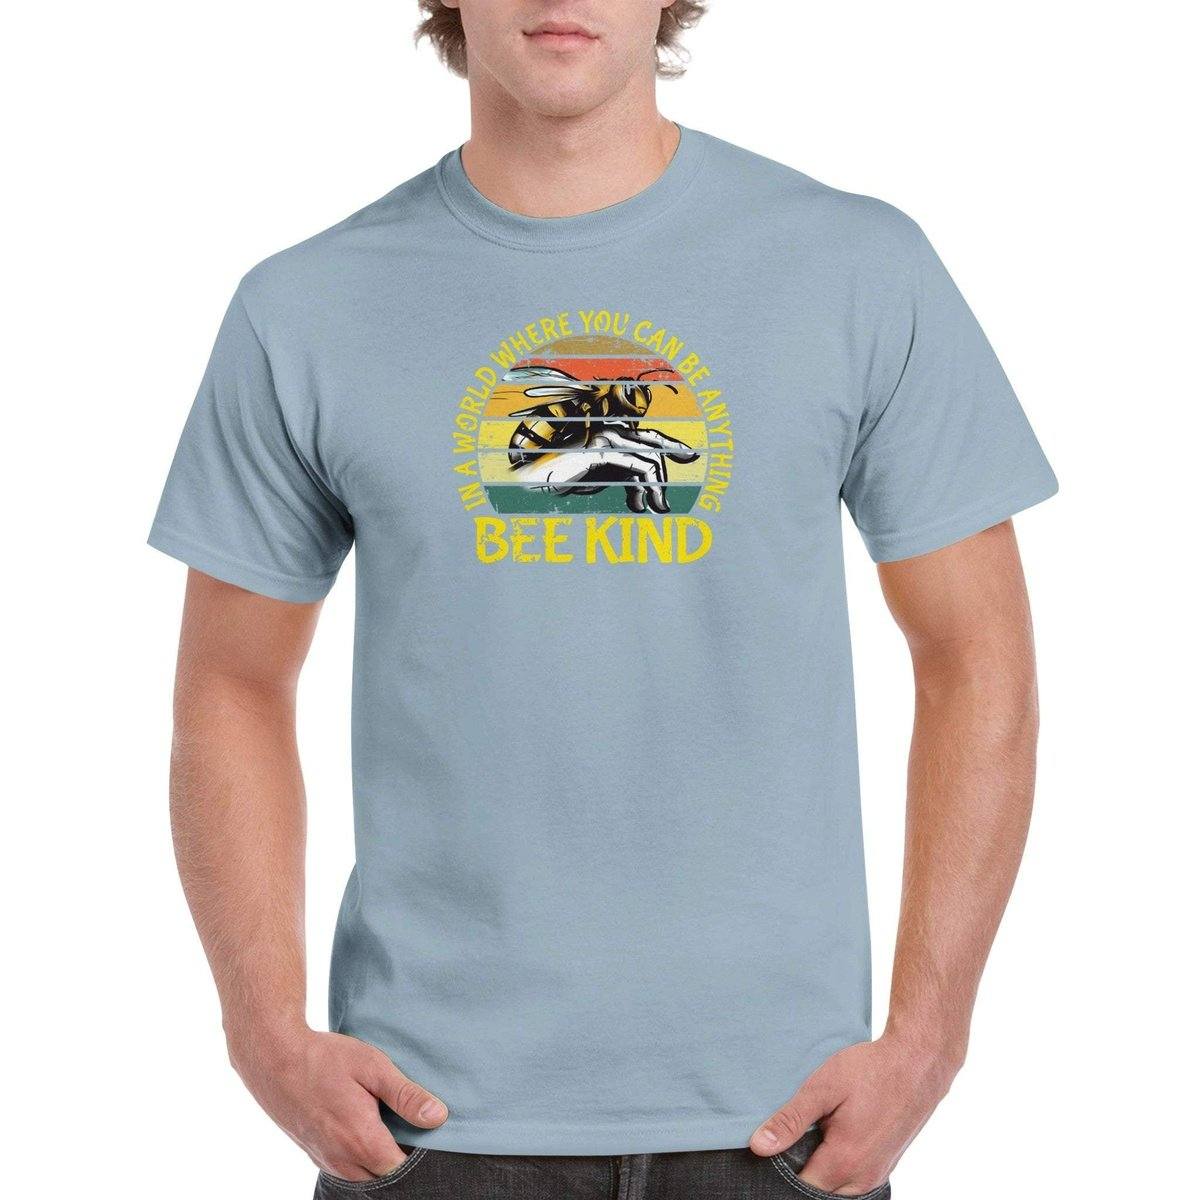 In a world where you can be anything bee kind Tshirt - Retro Vintage Bee - Unisex Crewneck T-shirt Australia Online Color Light Blue / S